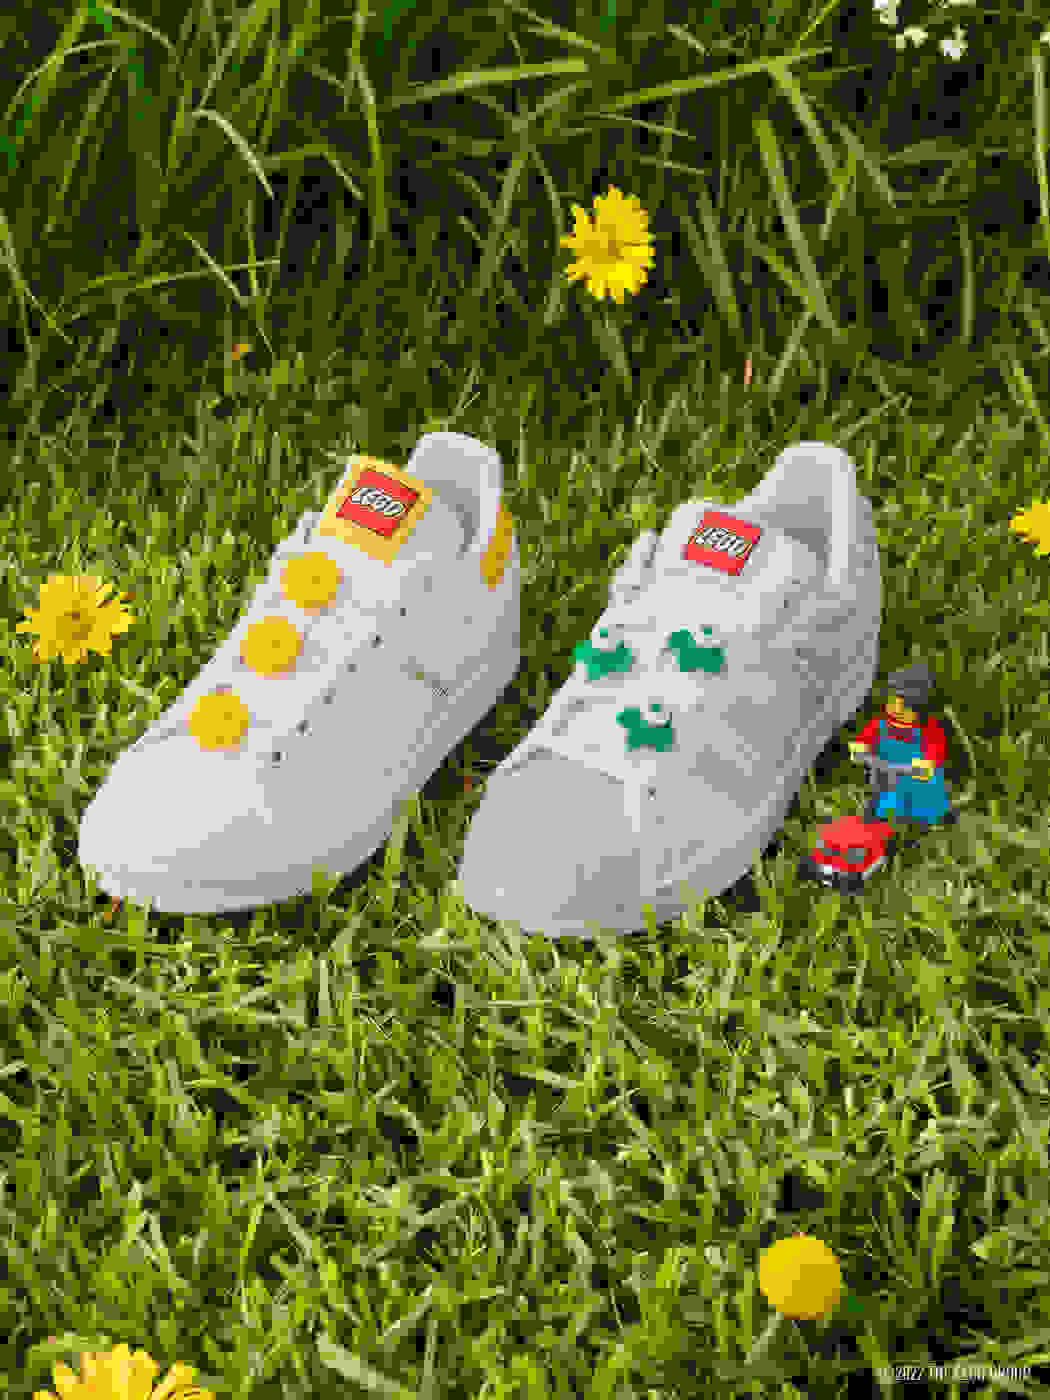 adidas Originals LEGO Superstar and Stan Smith shoes, nestled in meadow grass with LEGO lawnmower minifigure